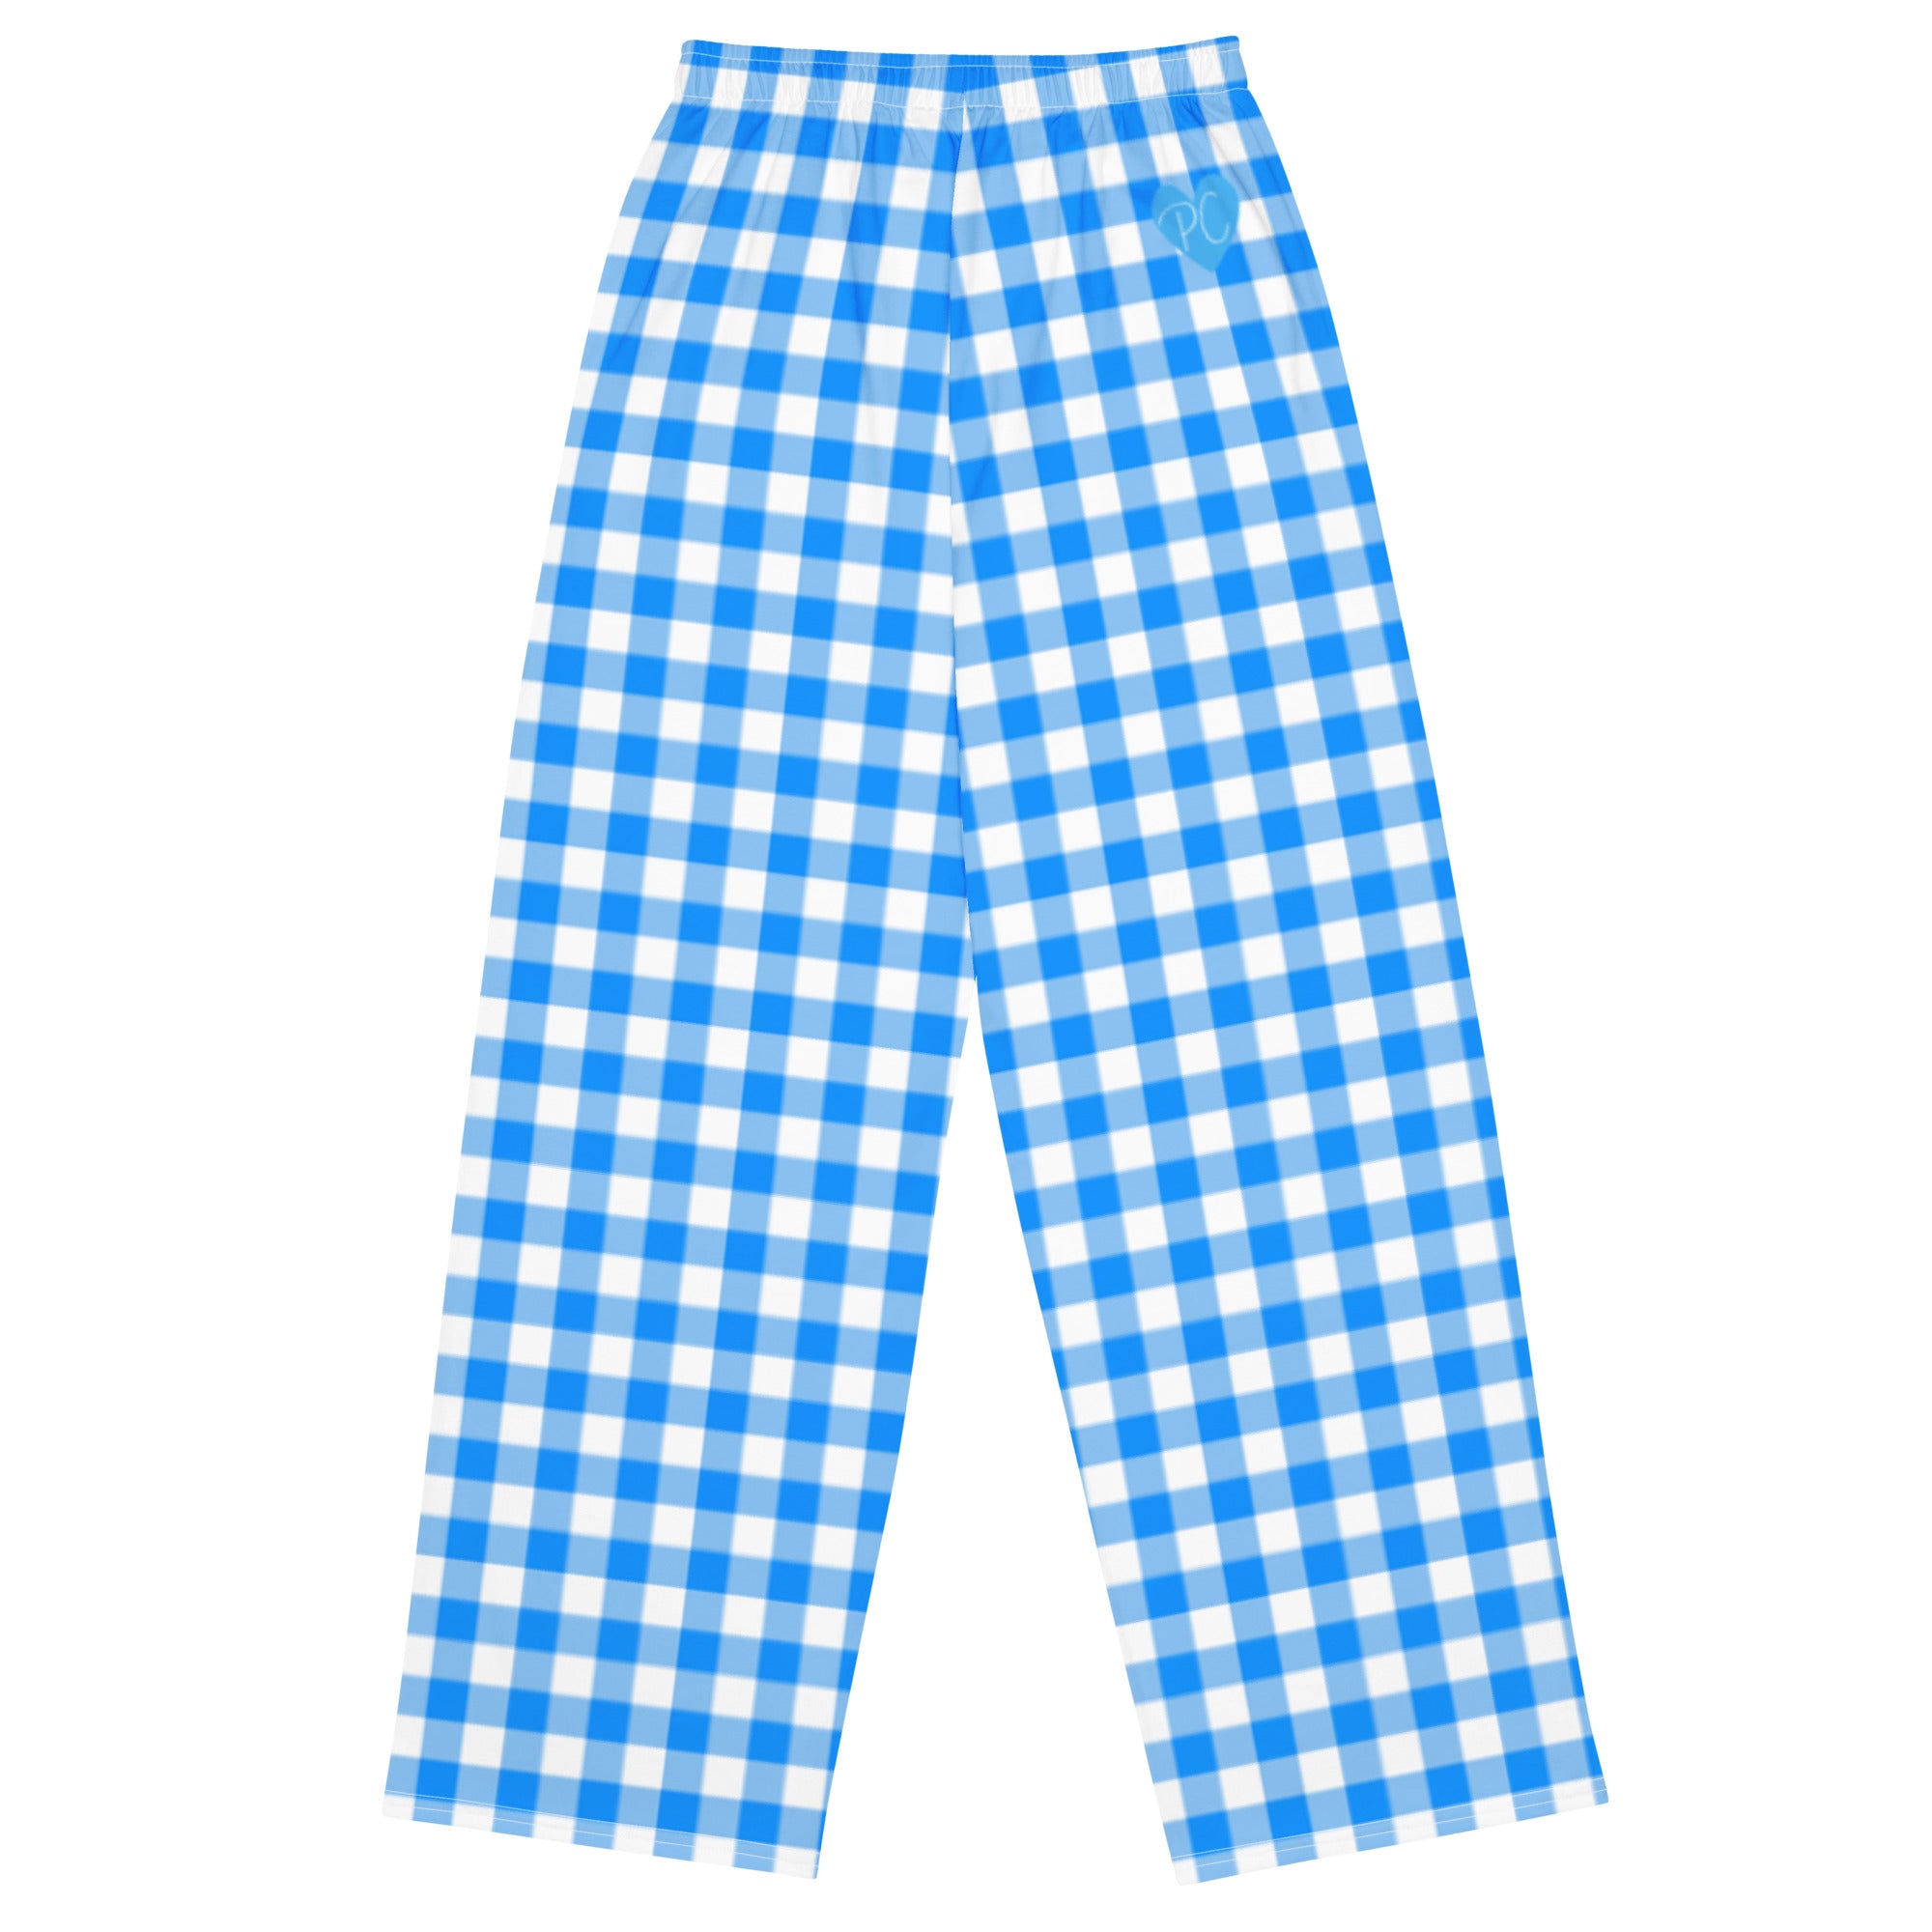 Loizziuy Women's Checkered Pants Casual Gingham Y2K Pink Relaxed